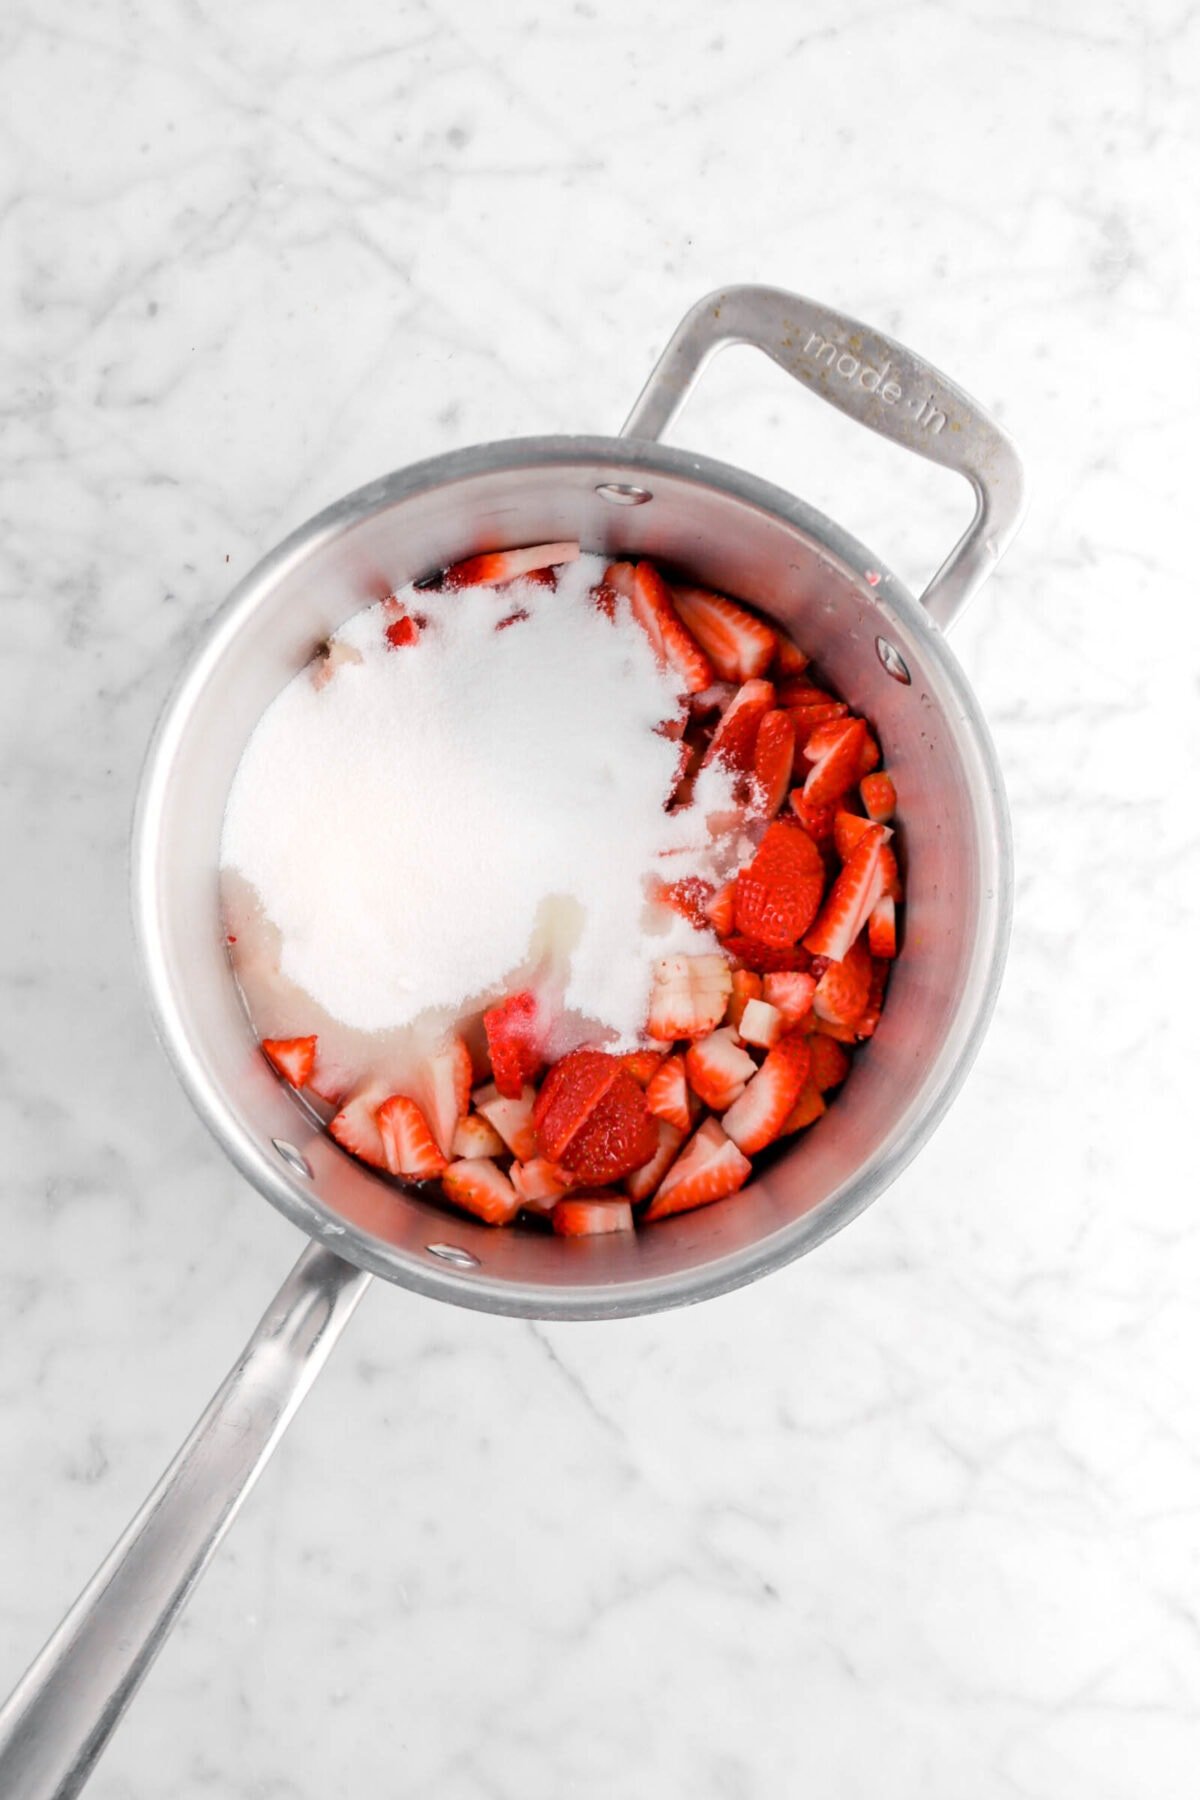 sugar, lemon juice, and chopped strawberries in a pot